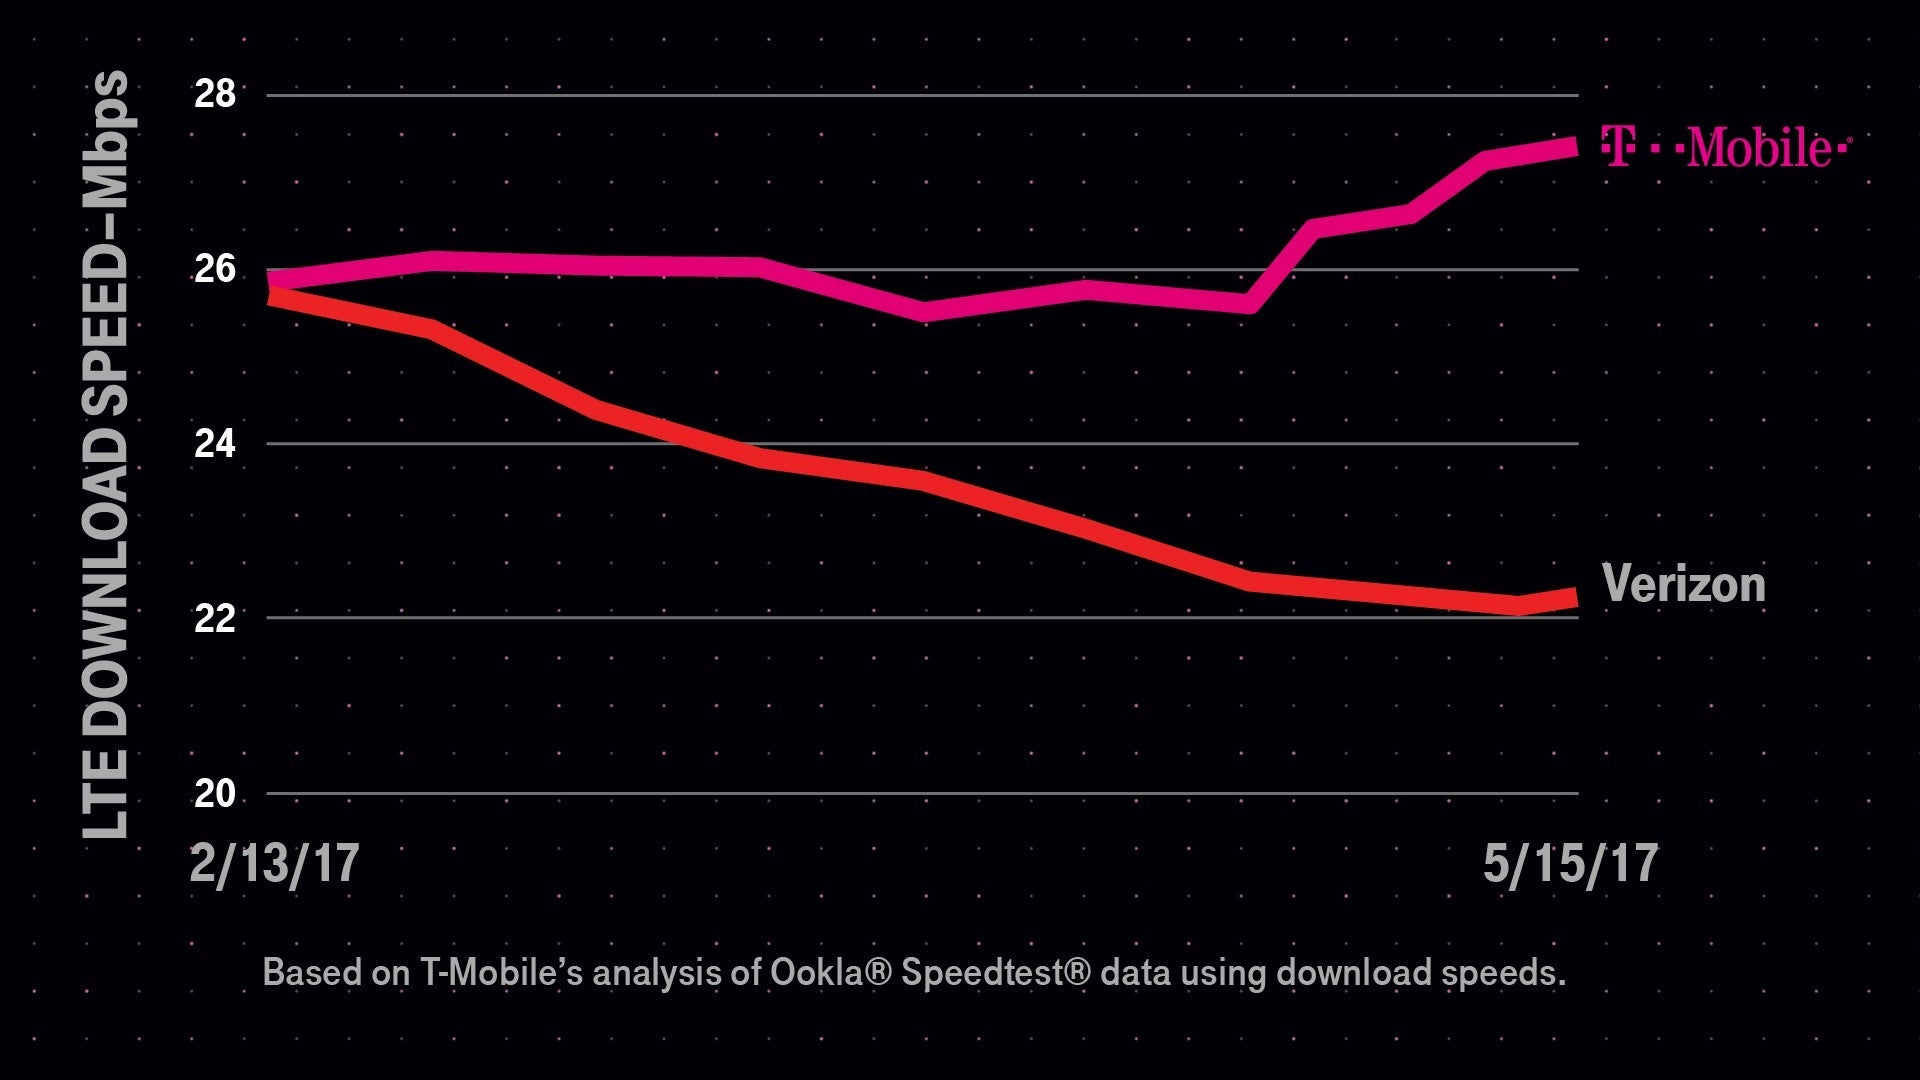 Since Verizon introduced its Unlimited plan, the carrier&#039;s network speed has declined 14% while T-Mobile&#039;s has risen by 23% - T-Mobile wants to help you #GetOutoftheRed with its new promotion aimed at Verizon subscribers